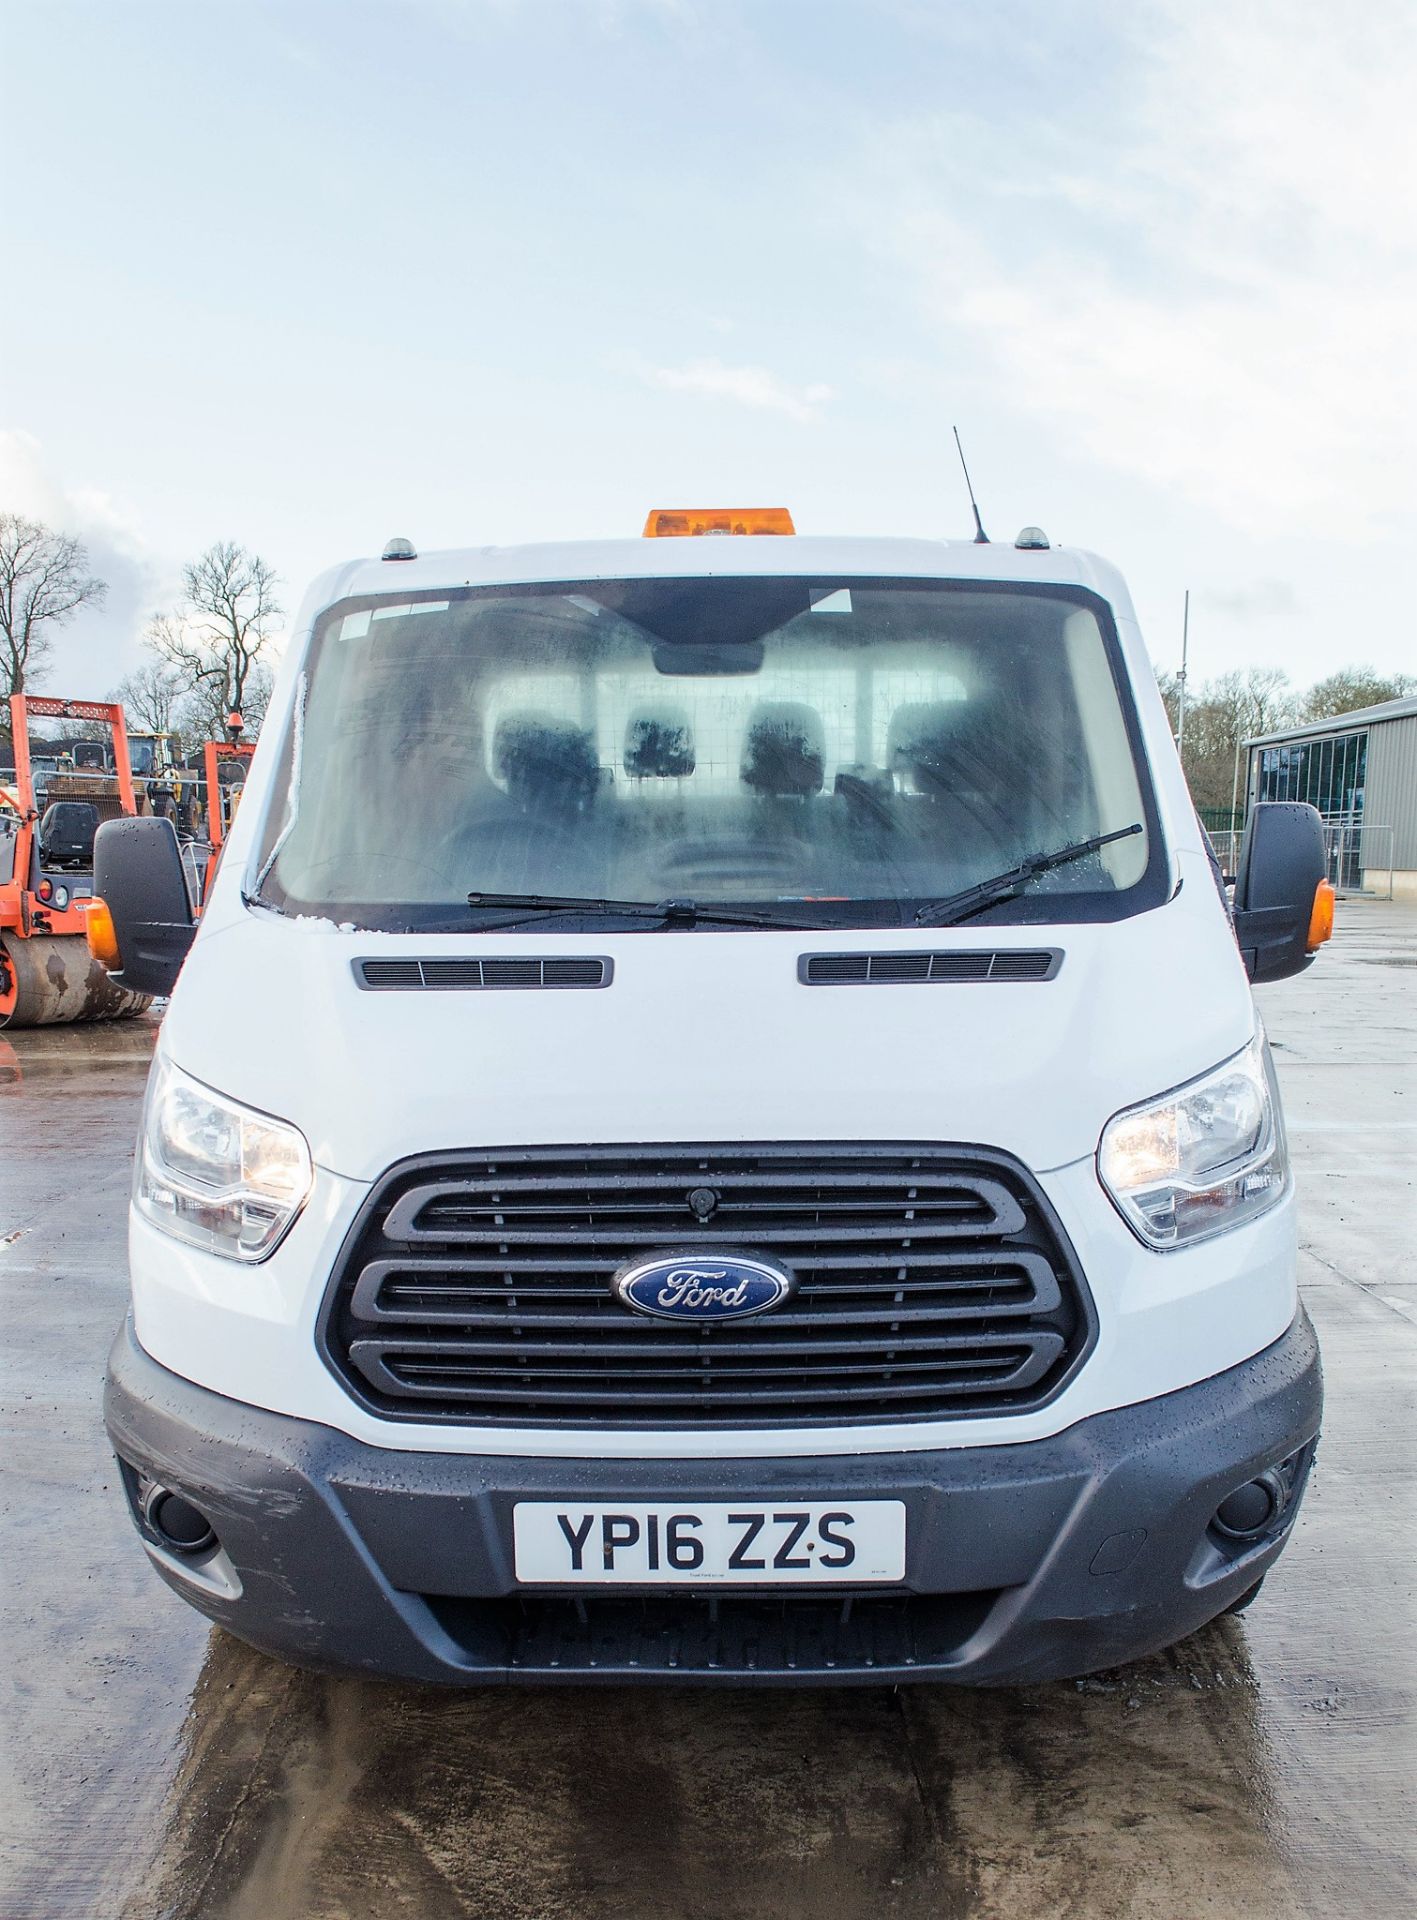 Ford Transit 350 double cab tipper Registration Number: YP16 ZZS Date of Registration: 07/07/2016 - Image 5 of 31